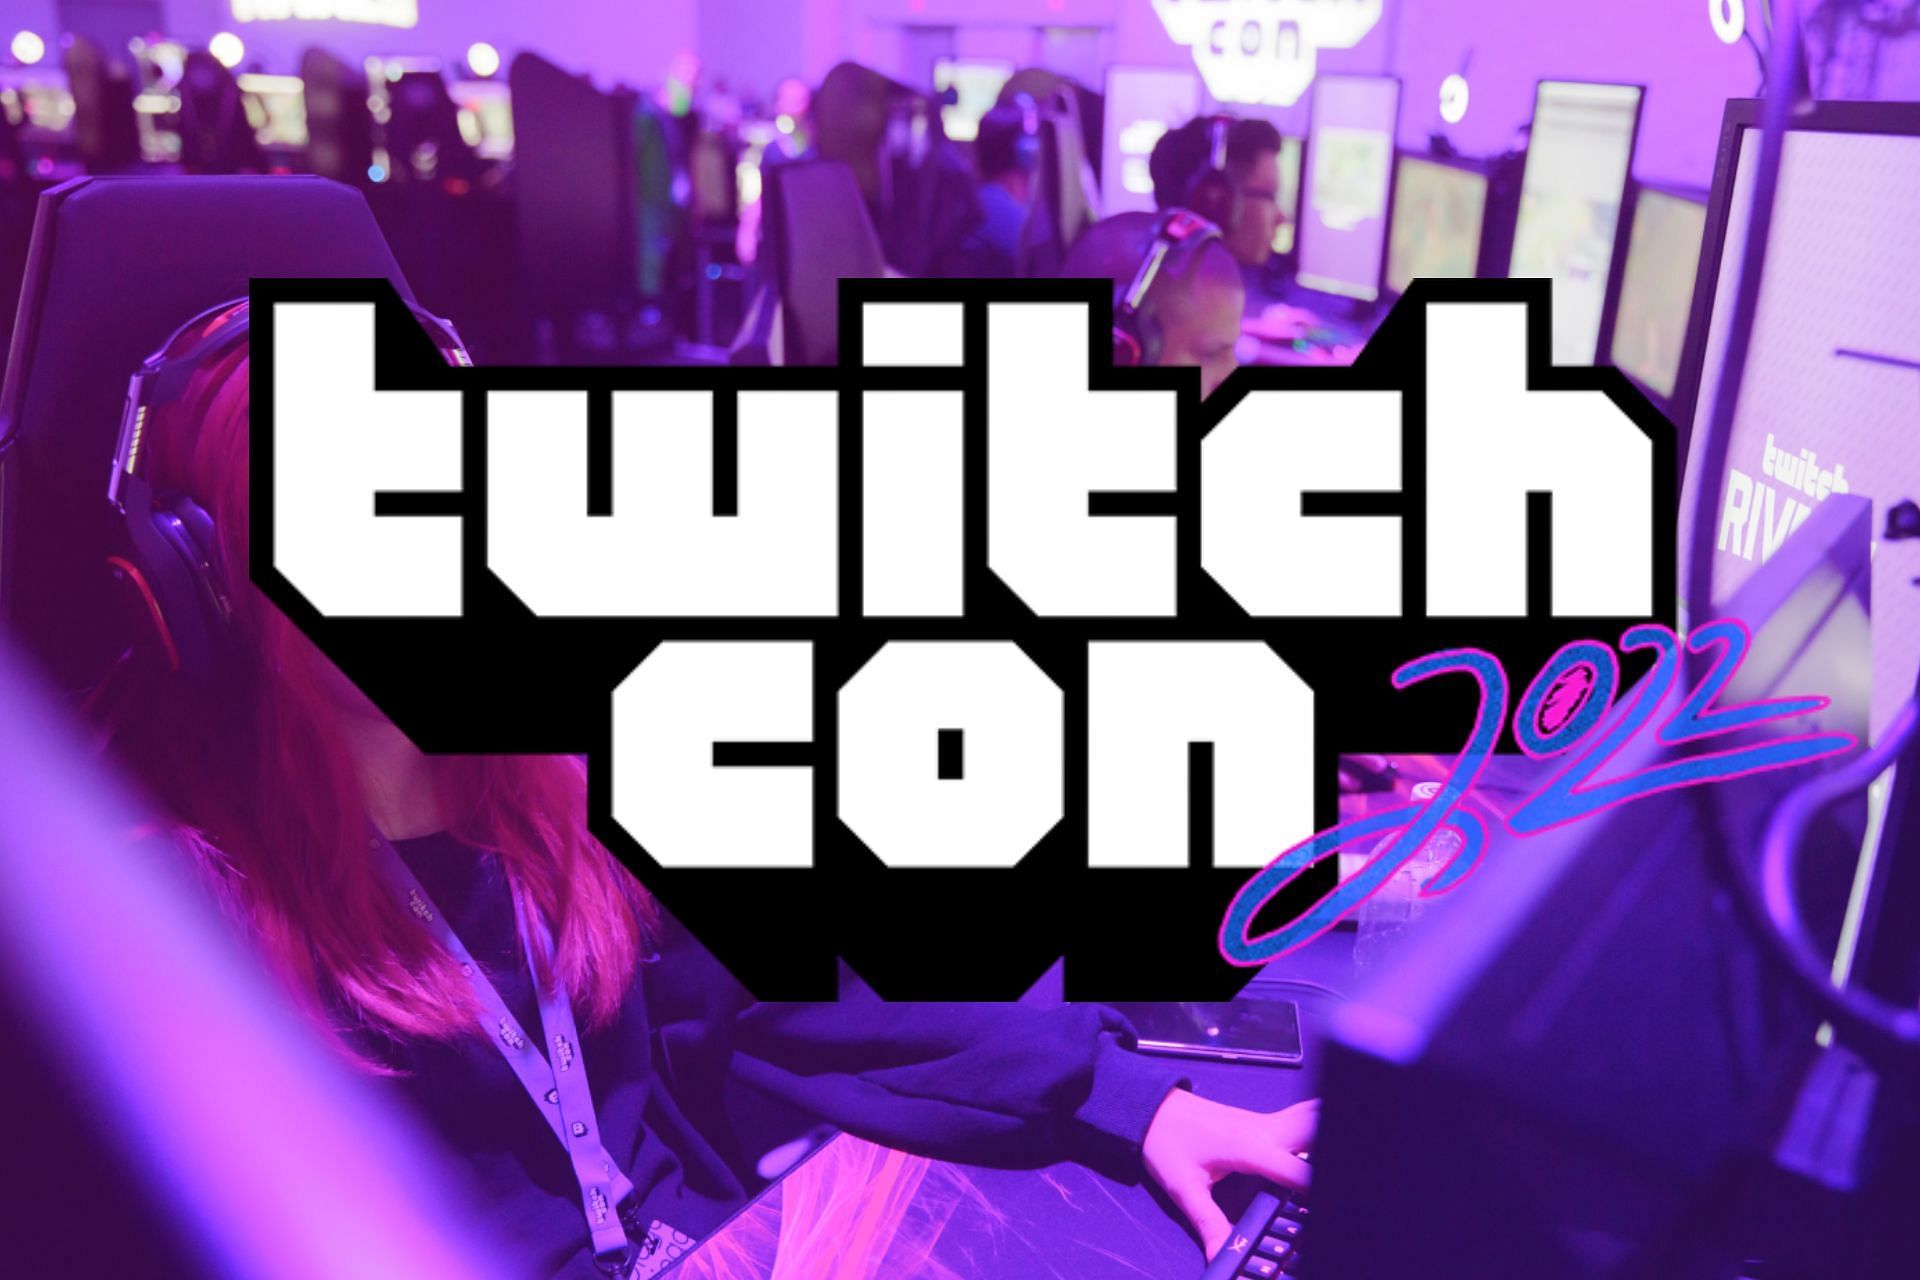 TwitchCon 2022 San Diego: Date, time, schedule, guests and more (Image via Sportskeeda)